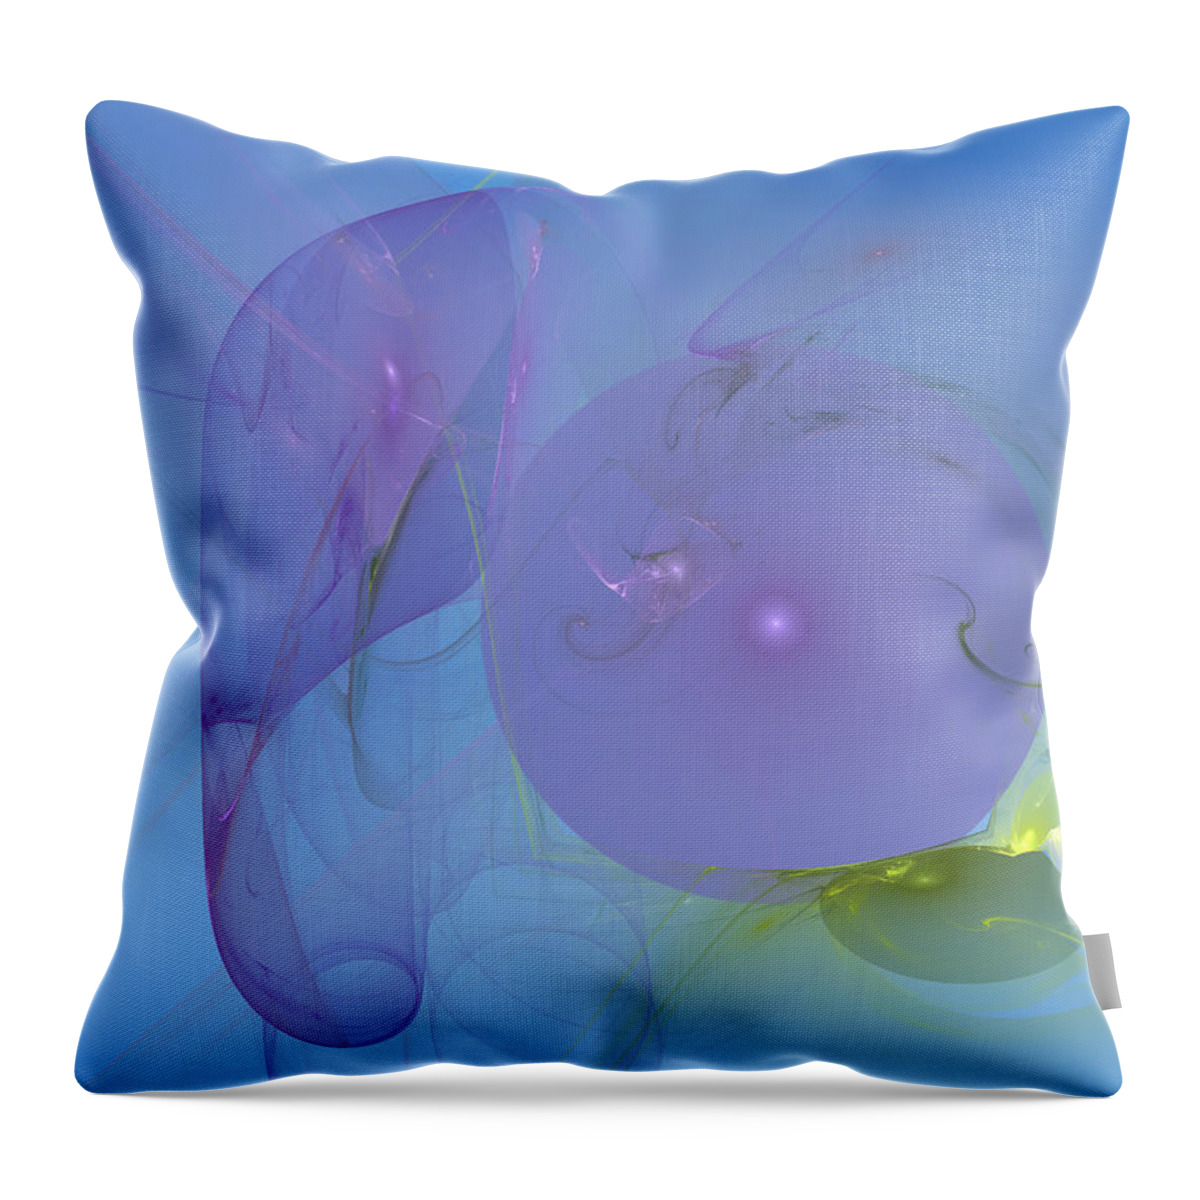 Art Throw Pillow featuring the digital art Angels in the Architecture by Jeff Iverson